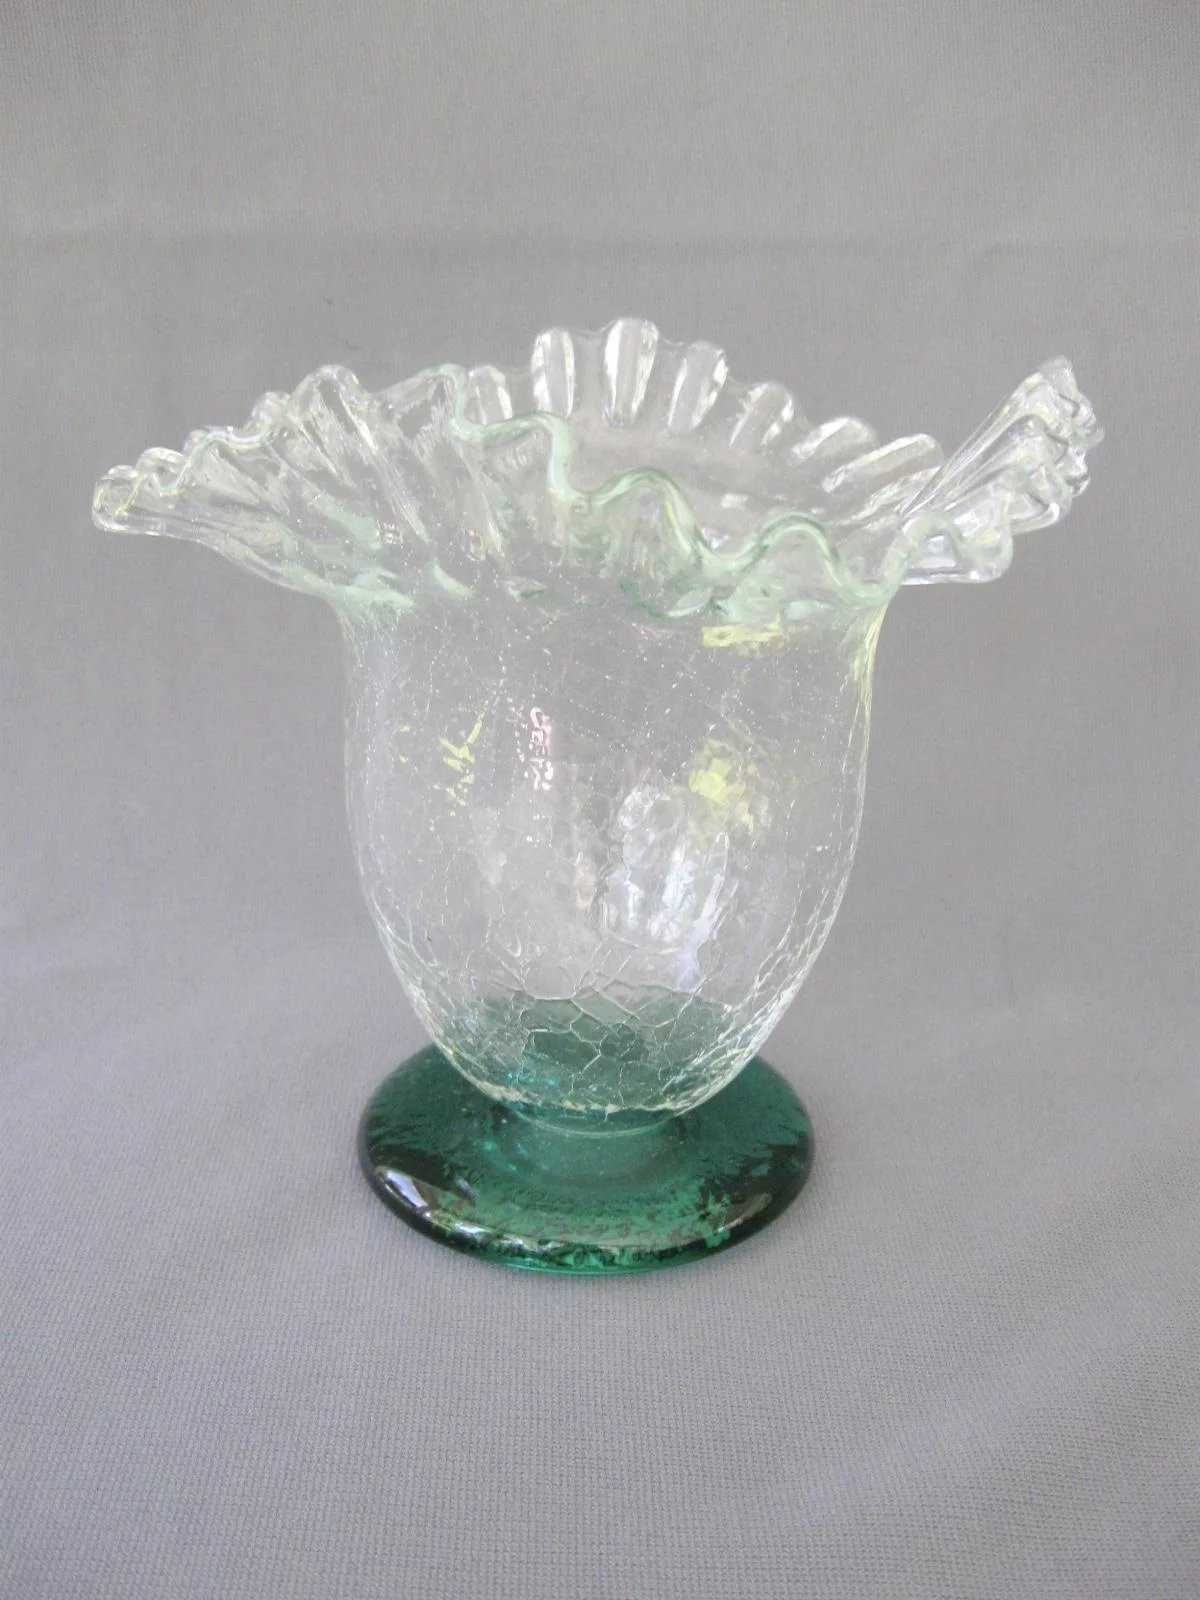 11 Great 2 Foot Tall Glass Vases 2024 free download 2 foot tall glass vases of 3 foot glass vase vase and cellar image avorcor com with regard to 3 foot gl vase and cellar image avorcor